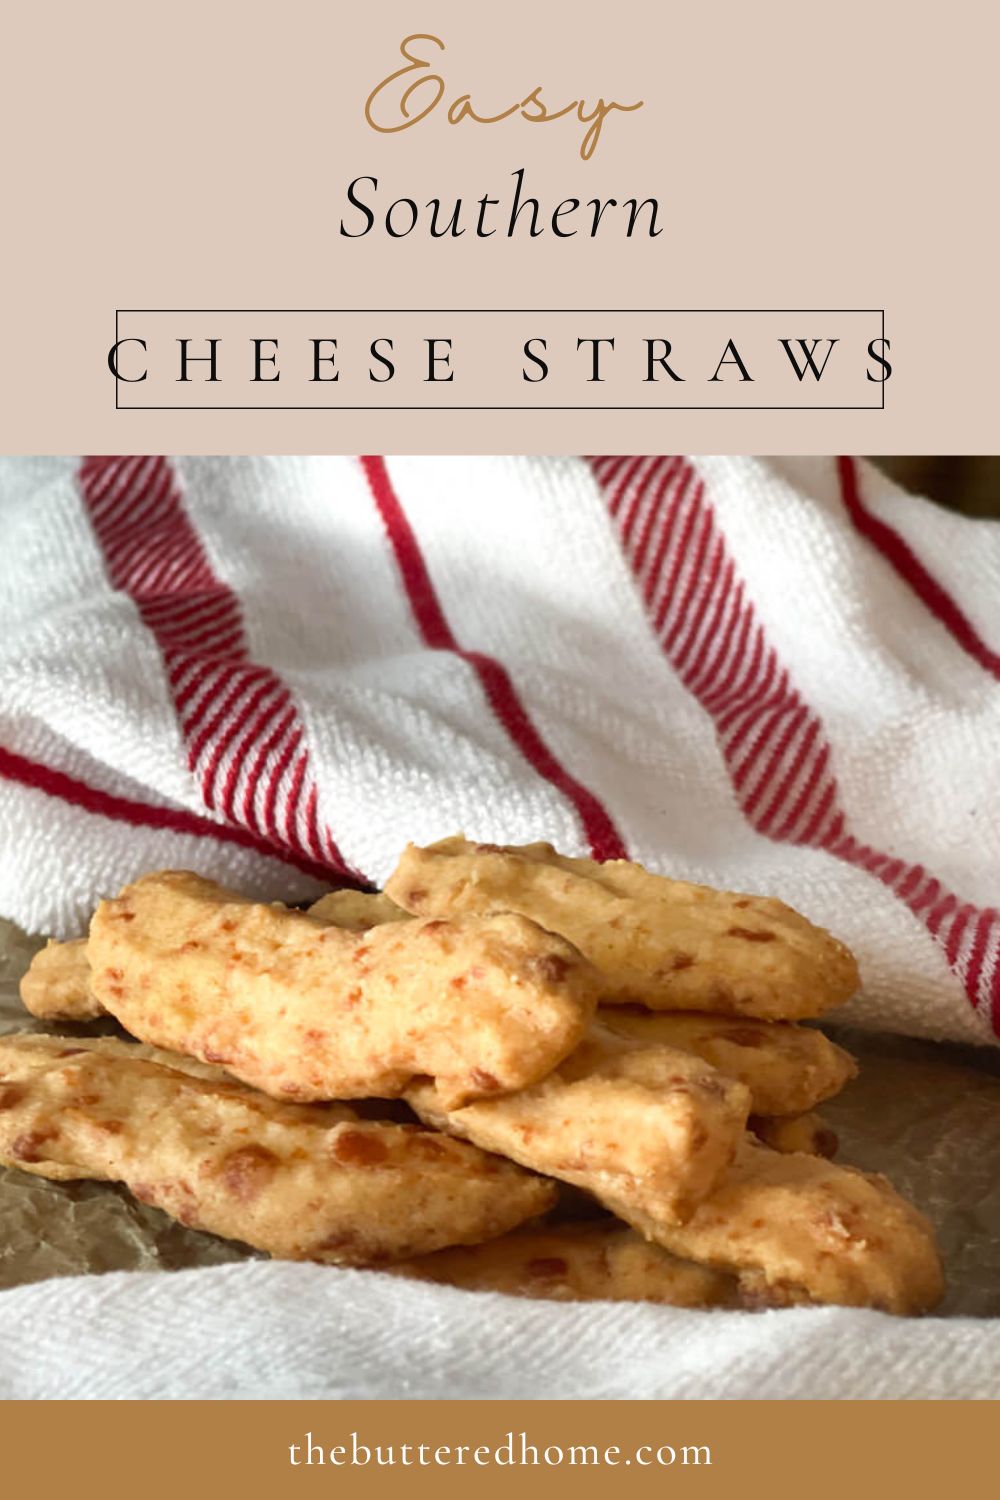 Easy Cheese Straws Recipe: How to Make It